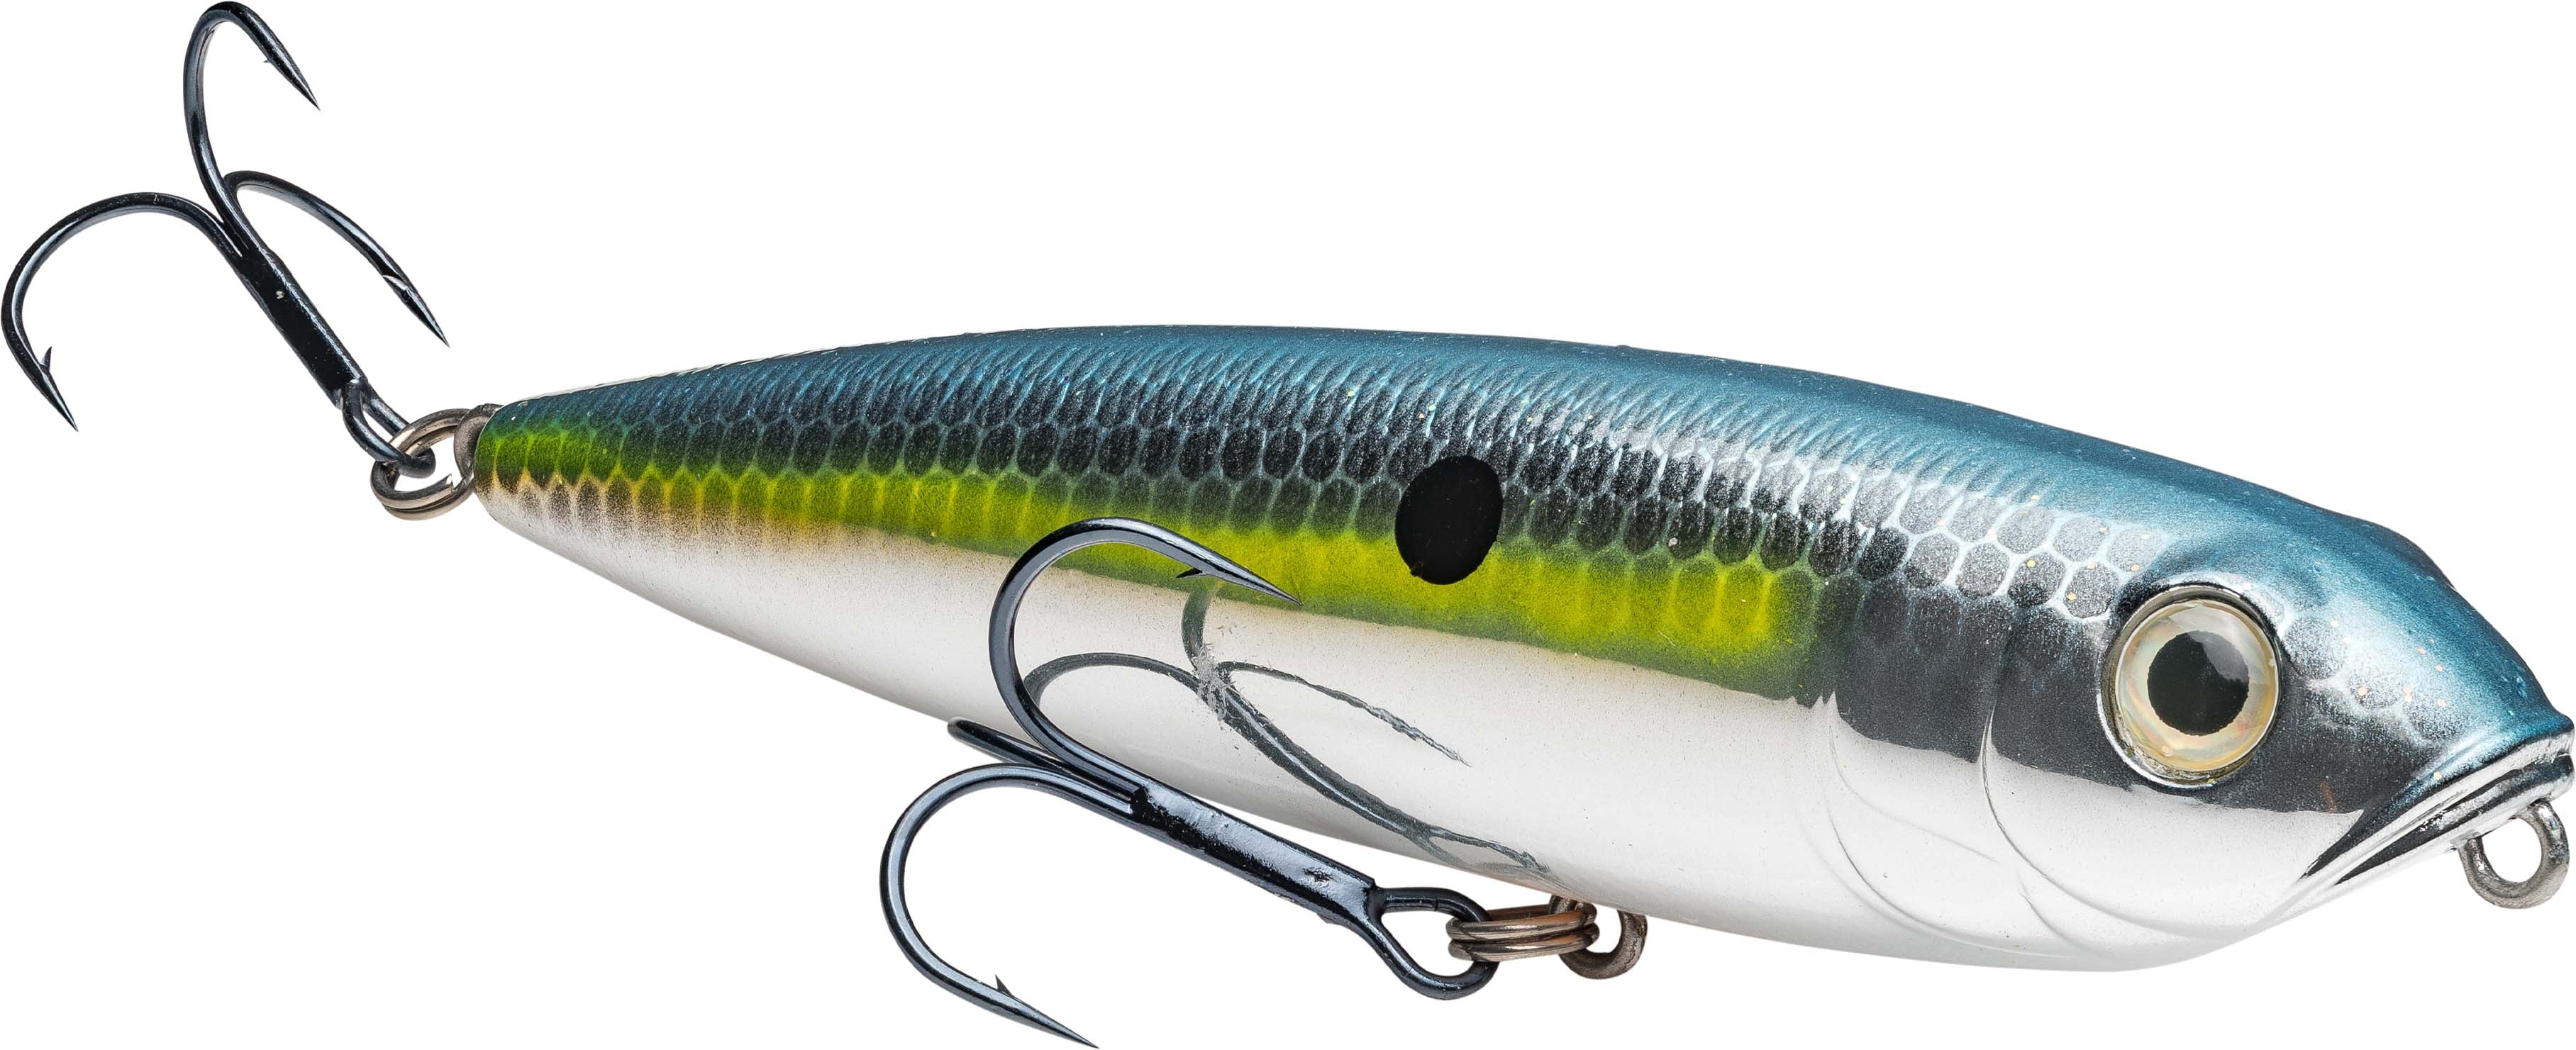 Wicked Lures Green Glow King Killer